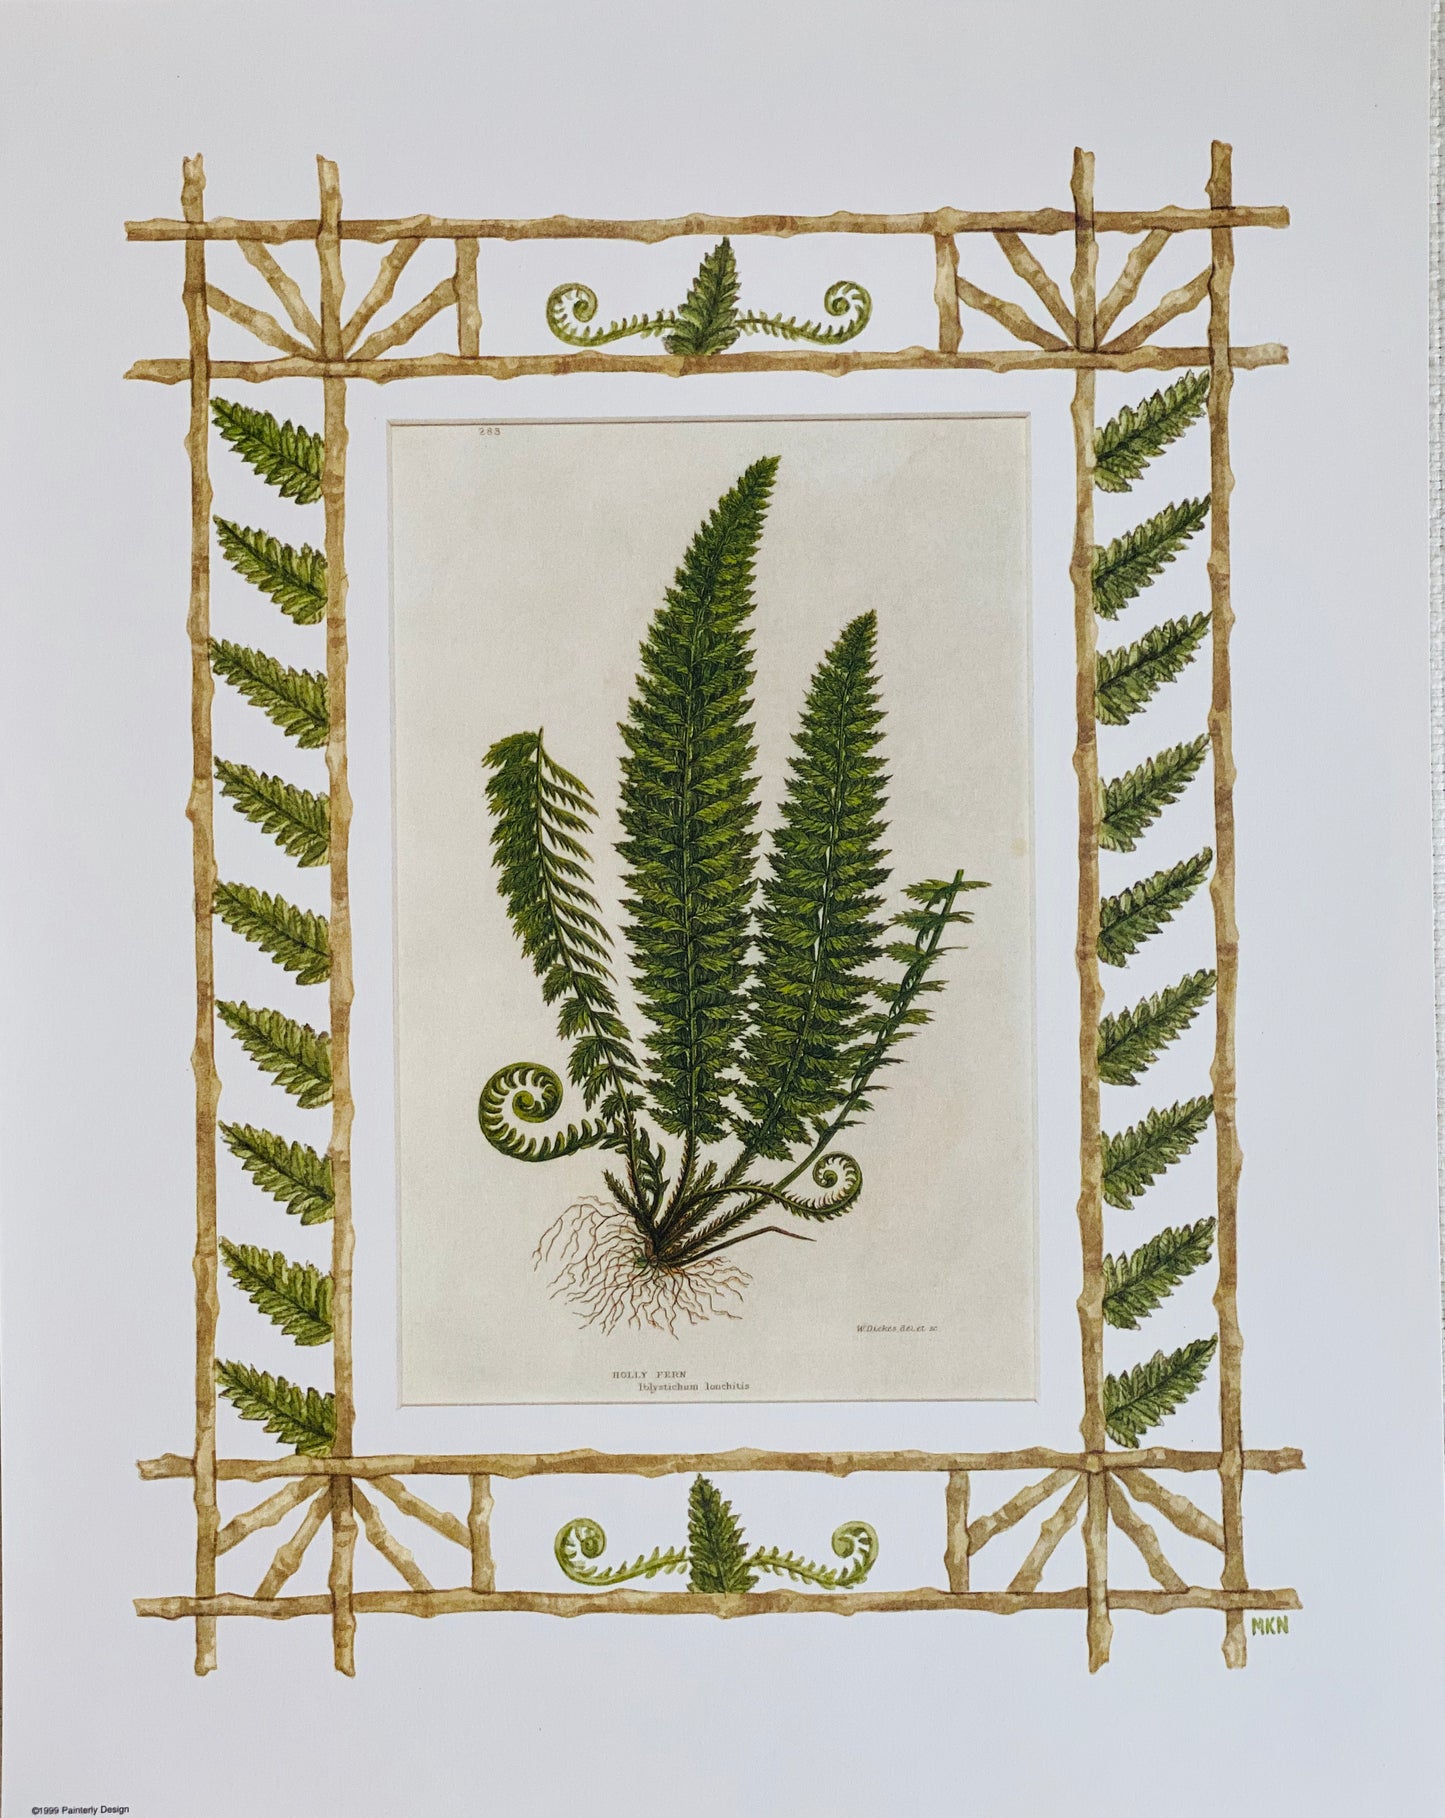 Set of 4 Fern antique prints with hand-painted borders